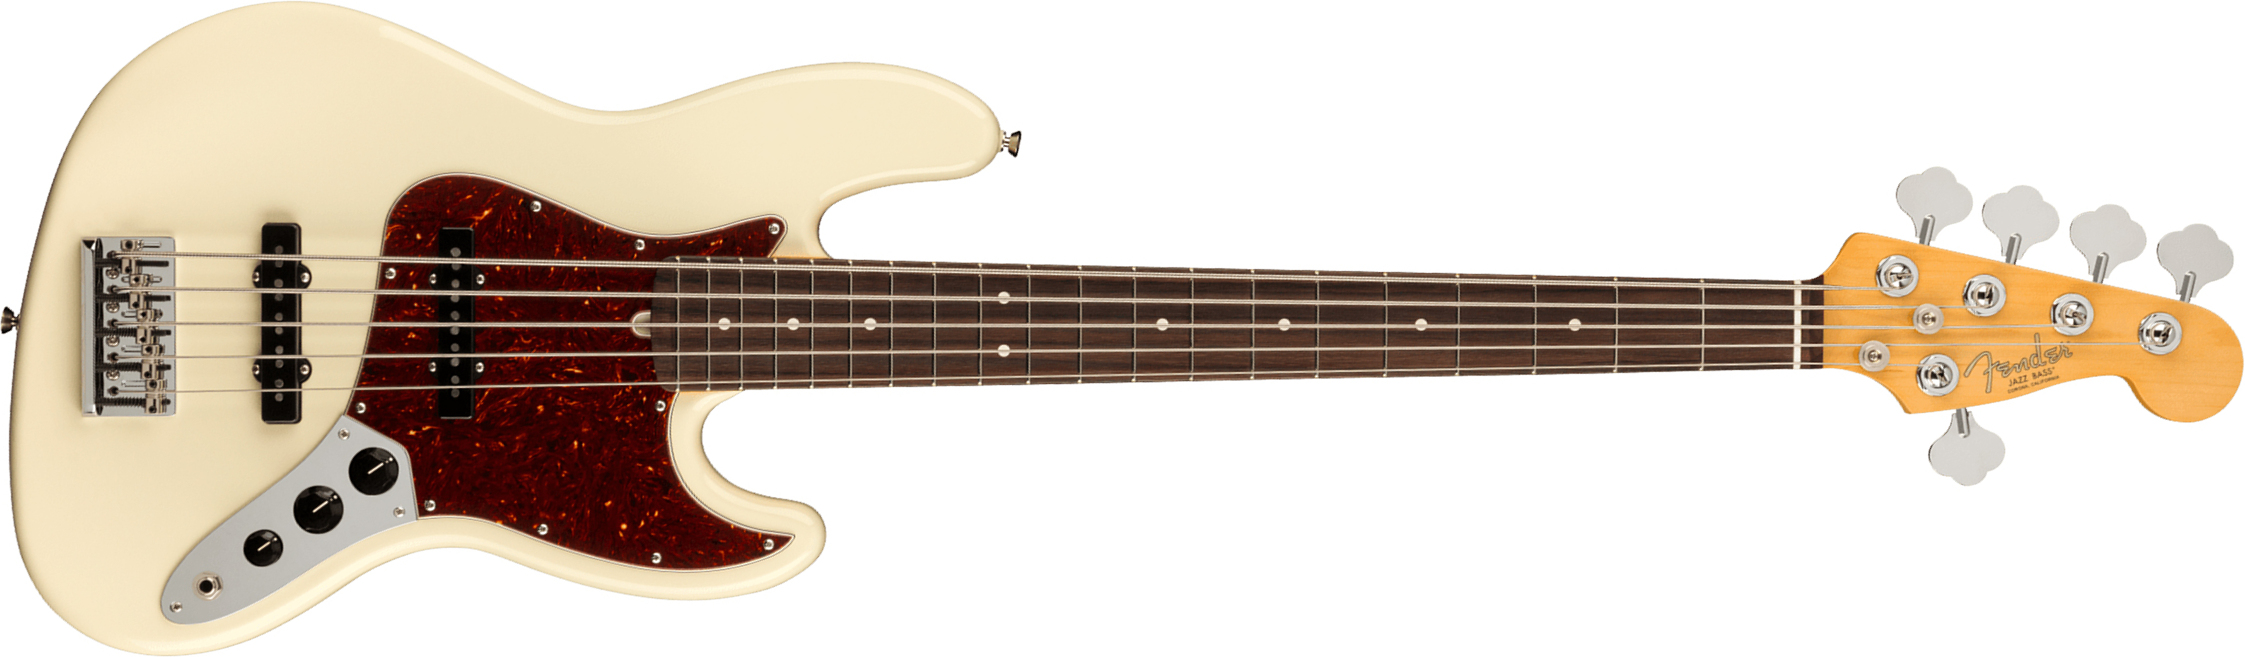 Fender Jazz Bass V American Professional Ii Usa 5-cordes Rw - Olympic White - Solid body electric bass - Main picture